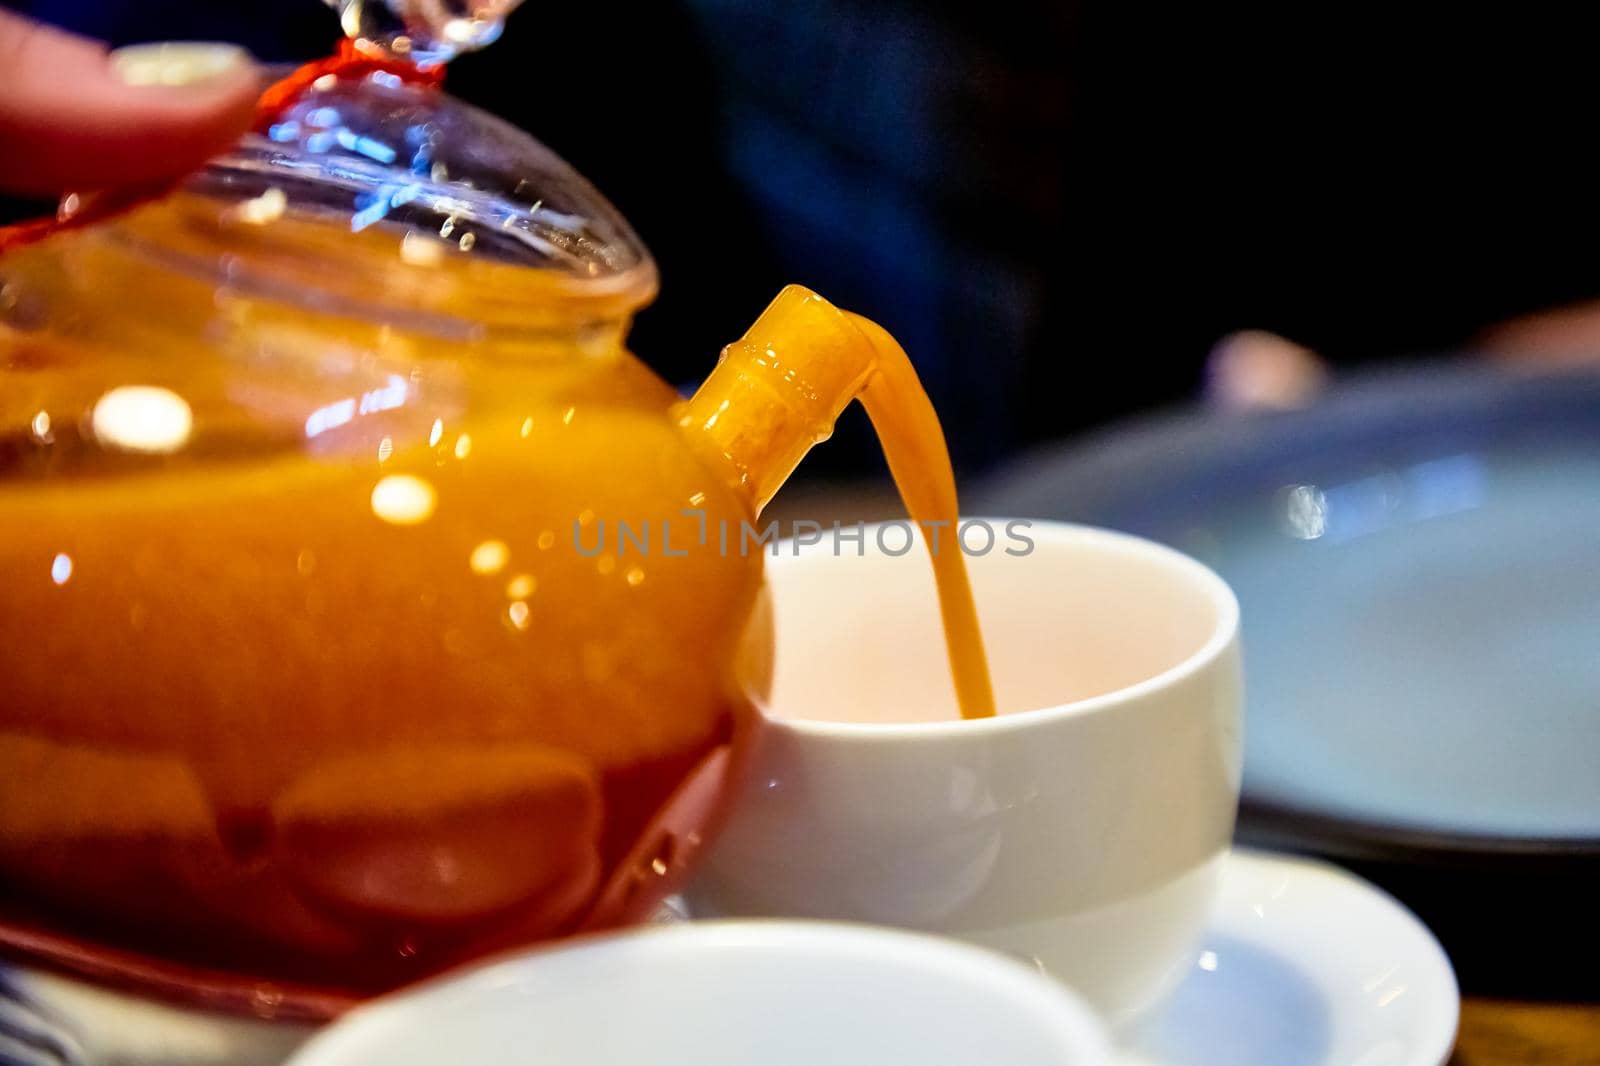 Red tea with sea buckthorn in a glass teapot. by Milanchikov